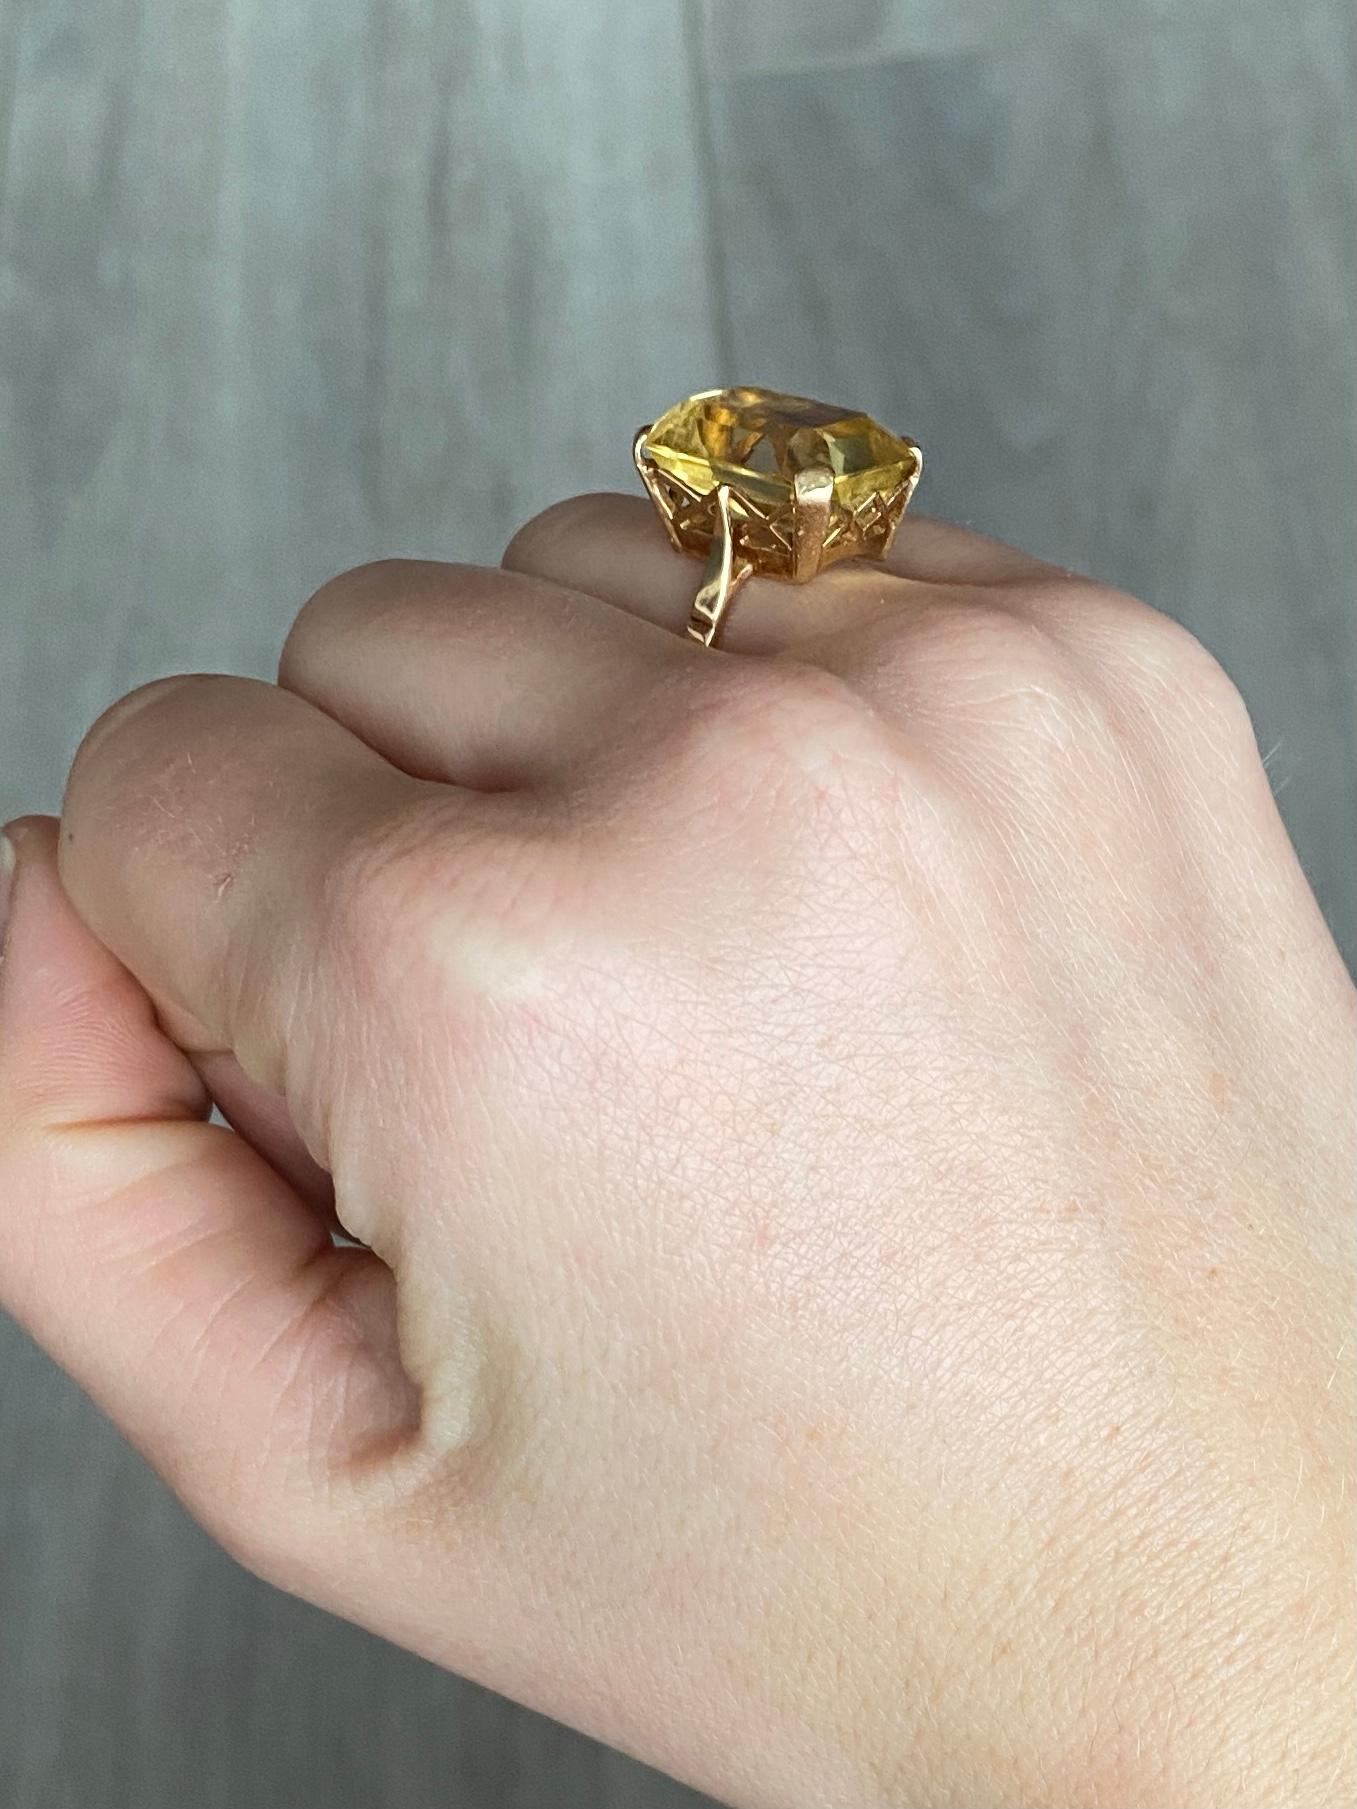 The gorgeous citrine stone in this ring is a lemon yellow colour and is set in simple claws. The gallery is ornate and all modelled in 9carat gold. 

Ring Size: M or 6 1/4
Stone Dimensions: 18x13.5mm
Height Off Finger: 10mm 

Weight: 6.6g